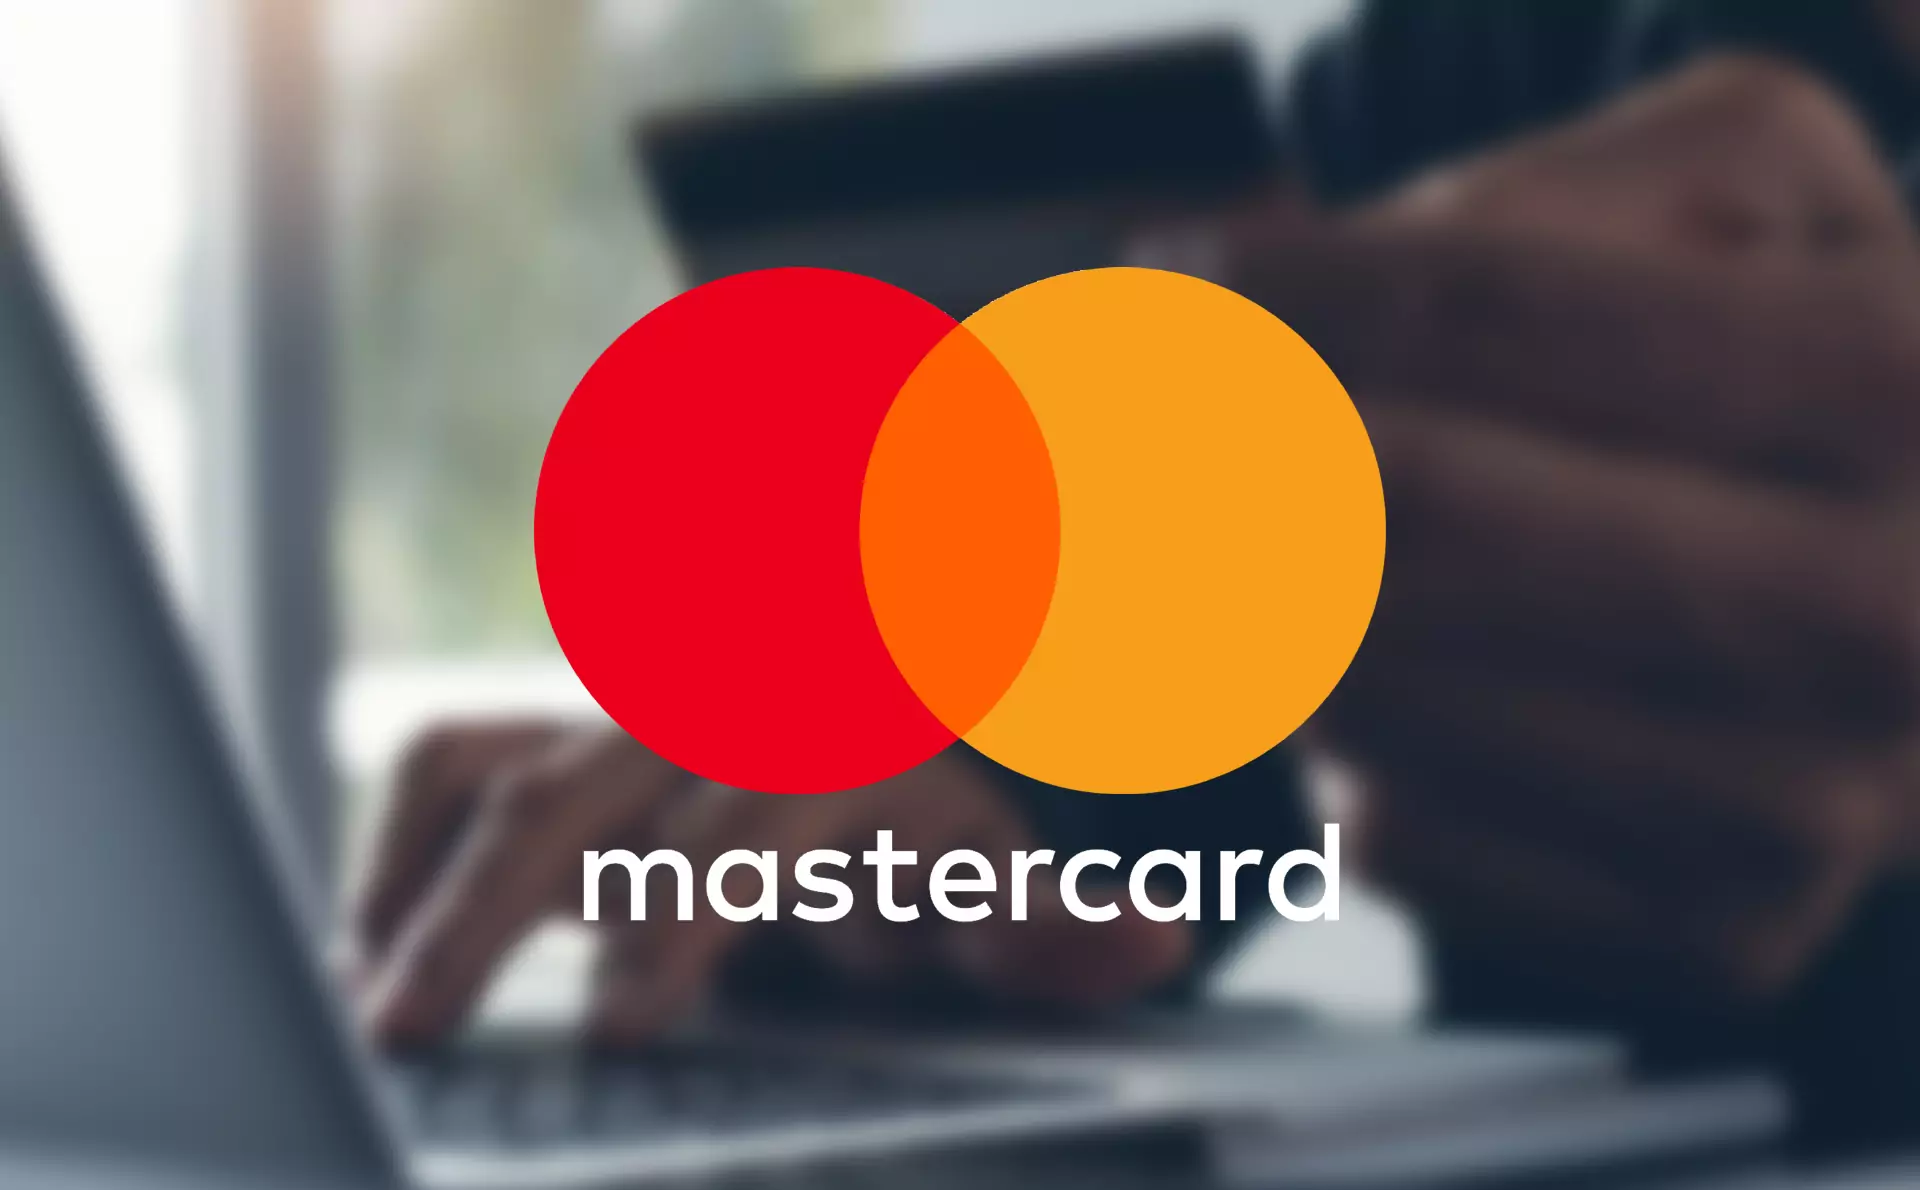 Mastercard is a well-respected payment system with a great reputation.